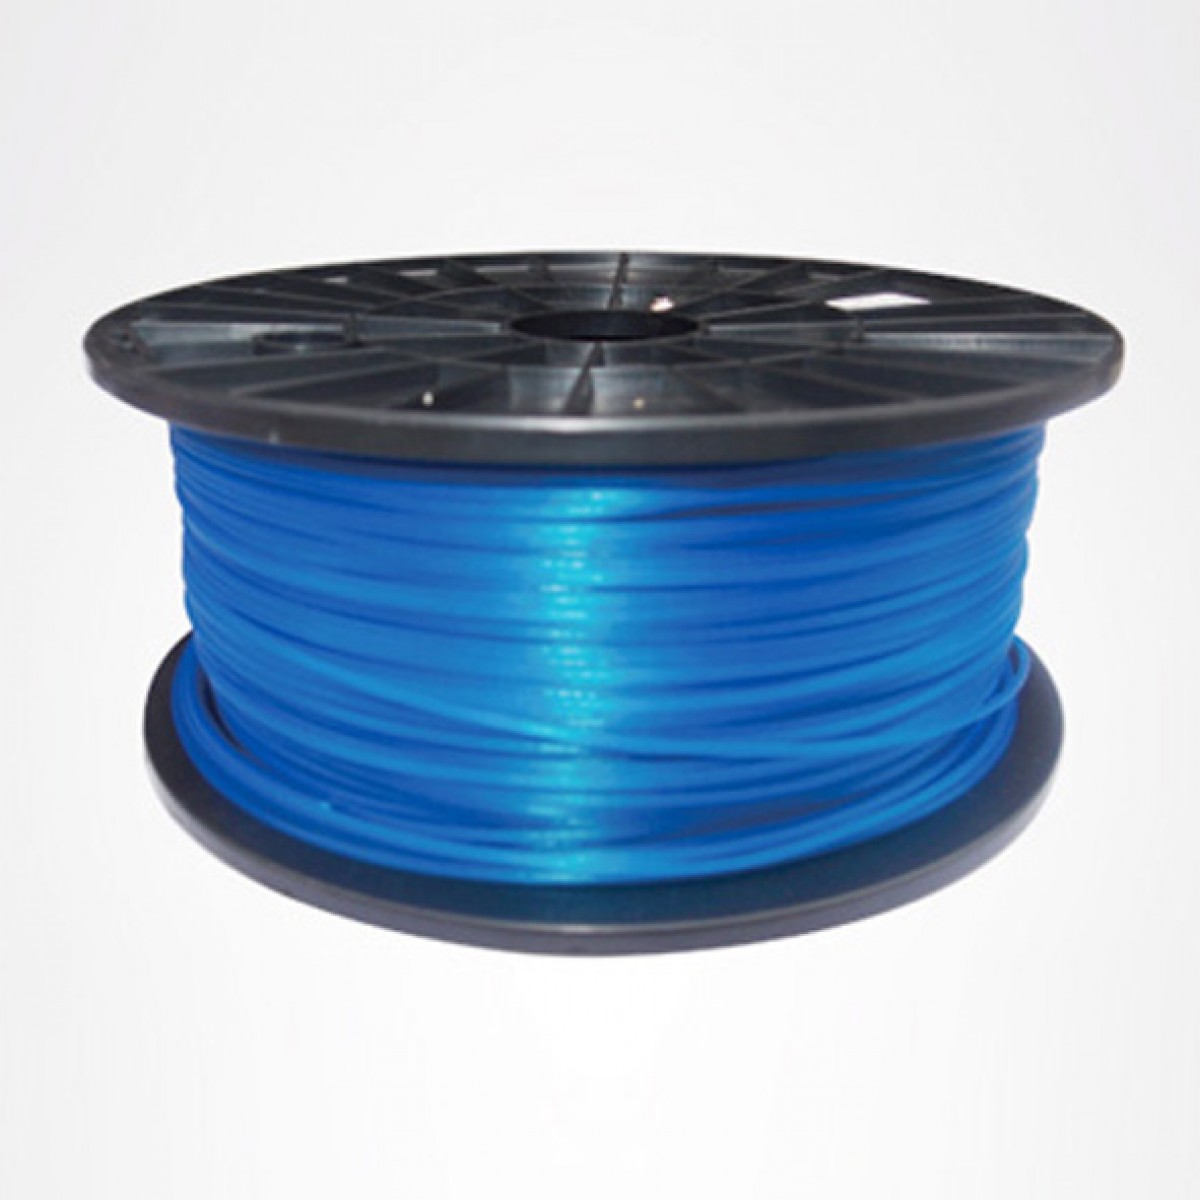 Premium Quality Blue ABS 3D Filament compatible with Universal PFABSBL